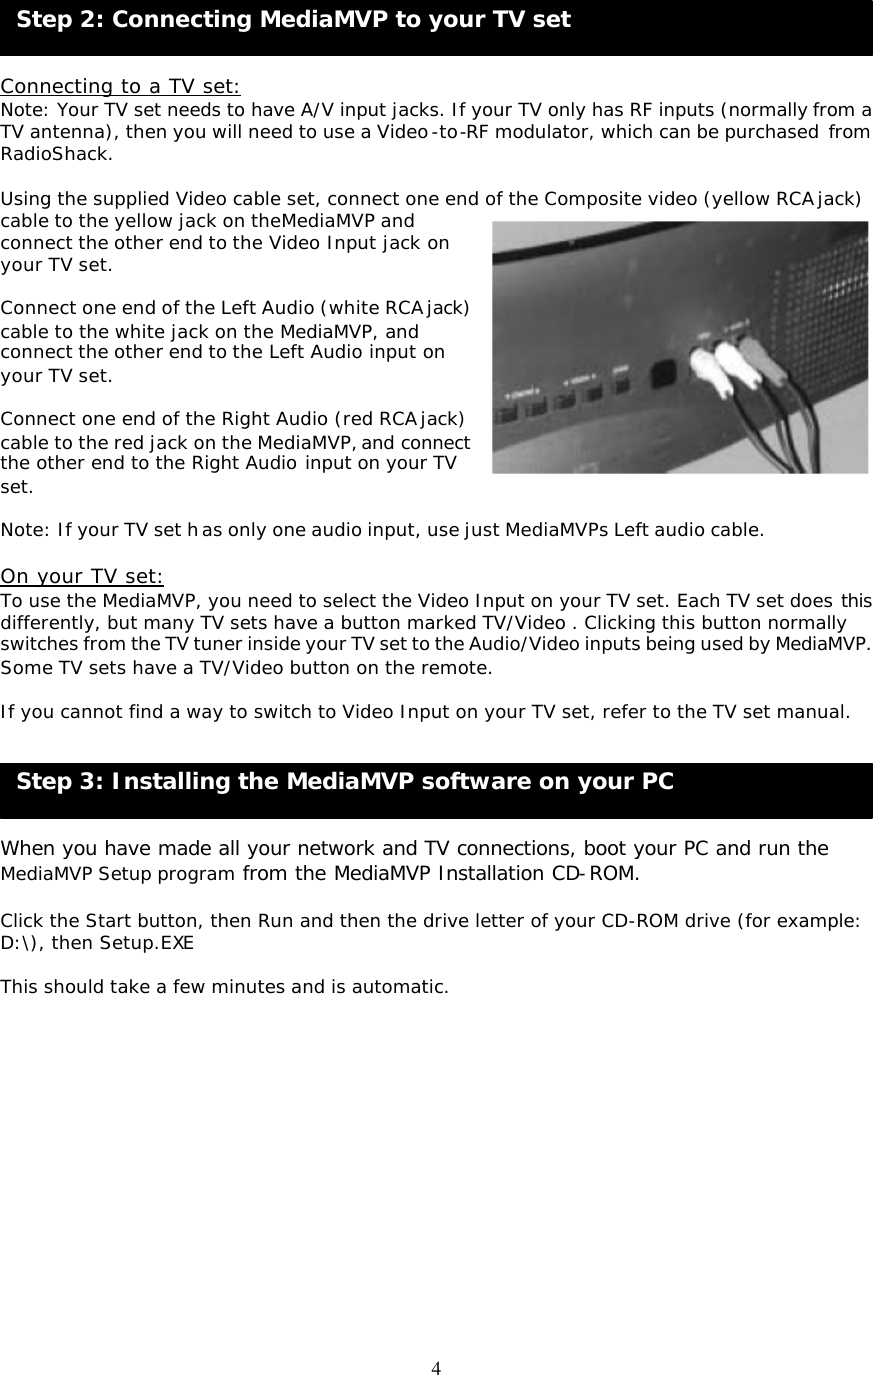 4 Step 2: Connecting MediaMVP to your TV set  Step 3: Installing the MediaMVP software on your PC     Connecting to a TV set: Note: Your TV set needs to have A/V input jacks. If your TV only has RF inputs (normally from a TV antenna), then you will need to use a Video-to-RF modulator, which can be purchased from RadioShack.  Using the supplied Video cable set, connect one end of the Composite video (yellow RCA jack) cable to the yellow jack on theMediaMVP and connect the other end to the Video Input jack on your TV set.   Connect one end of the Left Audio (white RCA jack) cable to the white jack on the MediaMVP, and connect the other end to the Left Audio input on your TV set.  Connect one end of the Right Audio (red RCA jack) cable to the red jack on the MediaMVP, and connect the other end to the Right Audio input on your TV set.  Note: If your TV set has only one audio input, use just MediaMVPs Left audio cable.  On your TV set: To use the MediaMVP, you need to select the Video Input on your TV set. Each TV set does this differently, but many TV sets have a button marked TV/Video . Clicking this button normally switches from the TV tuner inside your TV set to the Audio/Video inputs being used by MediaMVP. Some TV sets have a TV/Video button on the remote.  If you cannot find a way to switch to Video Input on your TV set, refer to the TV set manual.     When you have made all your network and TV connections, boot your PC and run the MediaMVP Setup program from the MediaMVP Installation CD-ROM.  Click the Start button, then Run and then the drive letter of your CD-ROM drive (for example: D:\), then Setup.EXE  This should take a few minutes and is automatic.           